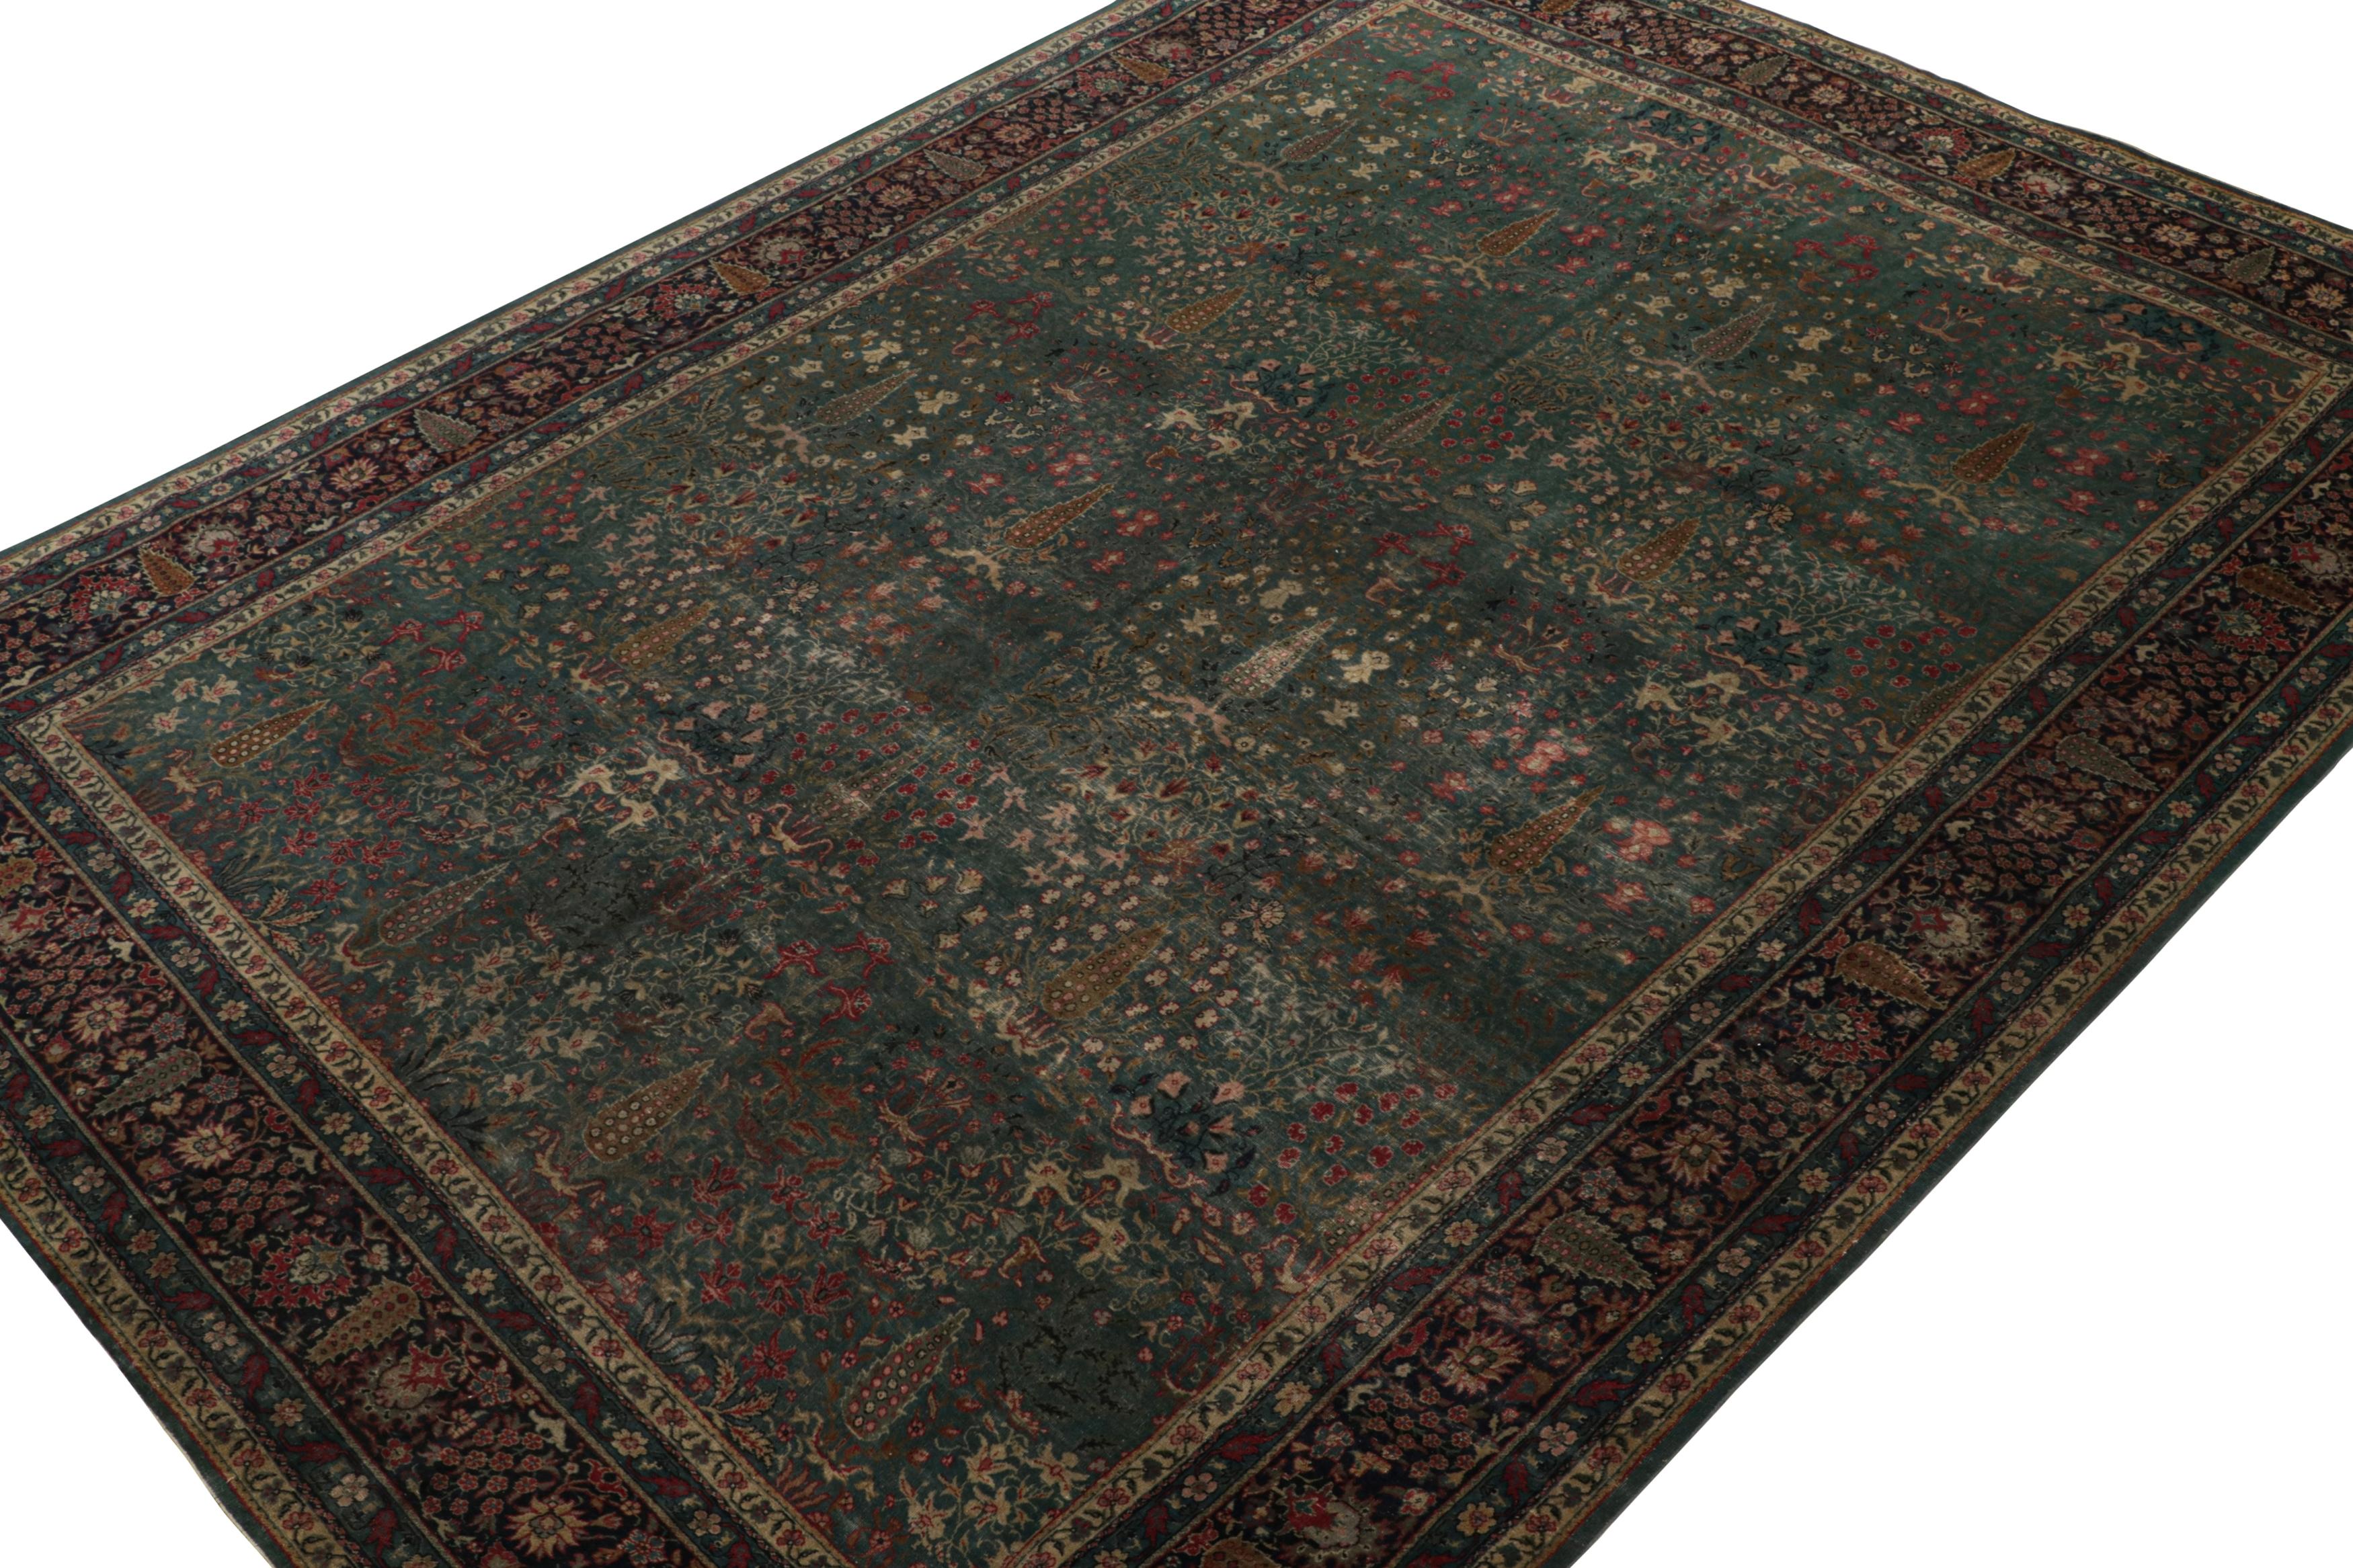 Hand-knotted in wool, this 9x12 antique Sivas rug, originating from Turkey, is a very special piece in its unique floral patterns, colorway variety of teal, brown and red, and personality. 

On the Design: 

In a delightful departure from